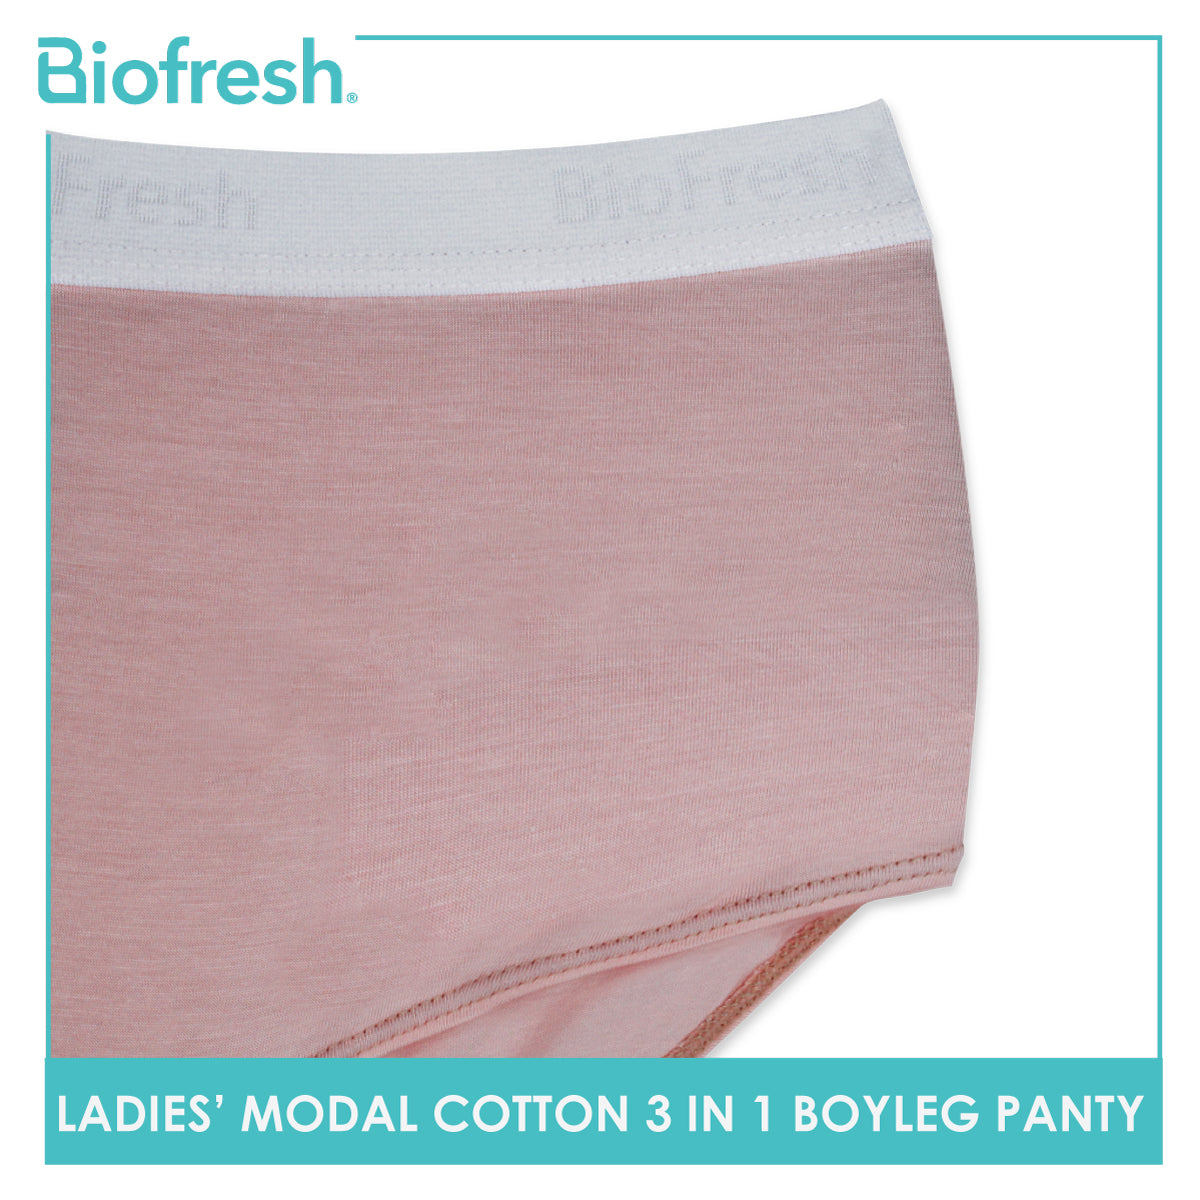 Biofresh Ladies' Antimicrobial Cotton Full Panty 3 pieces in a